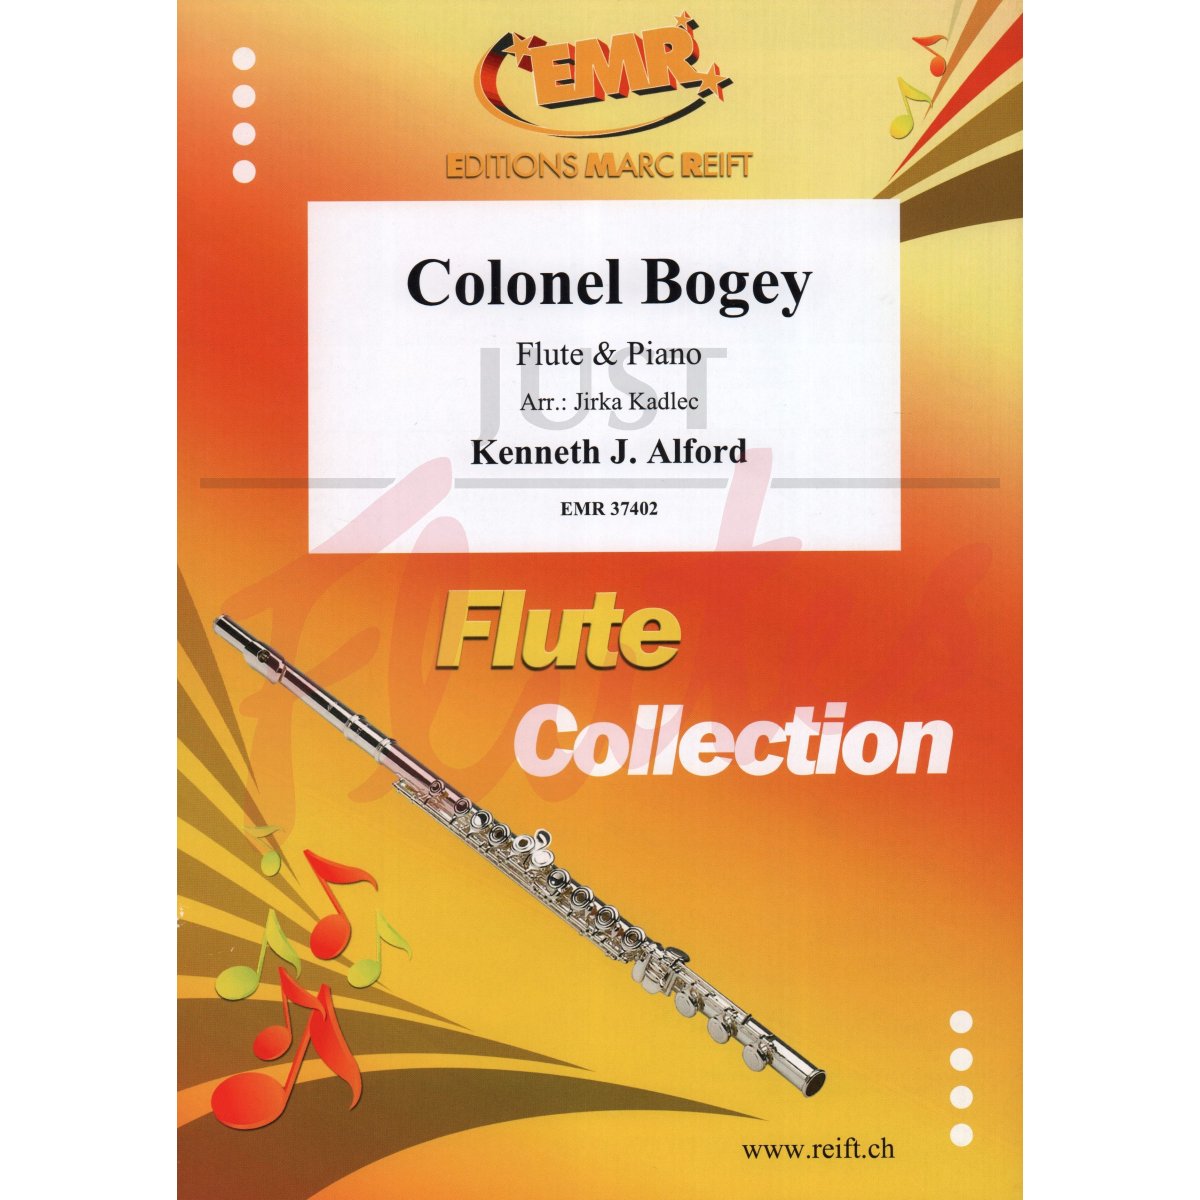 Colonel Bogey for Flute and Piano